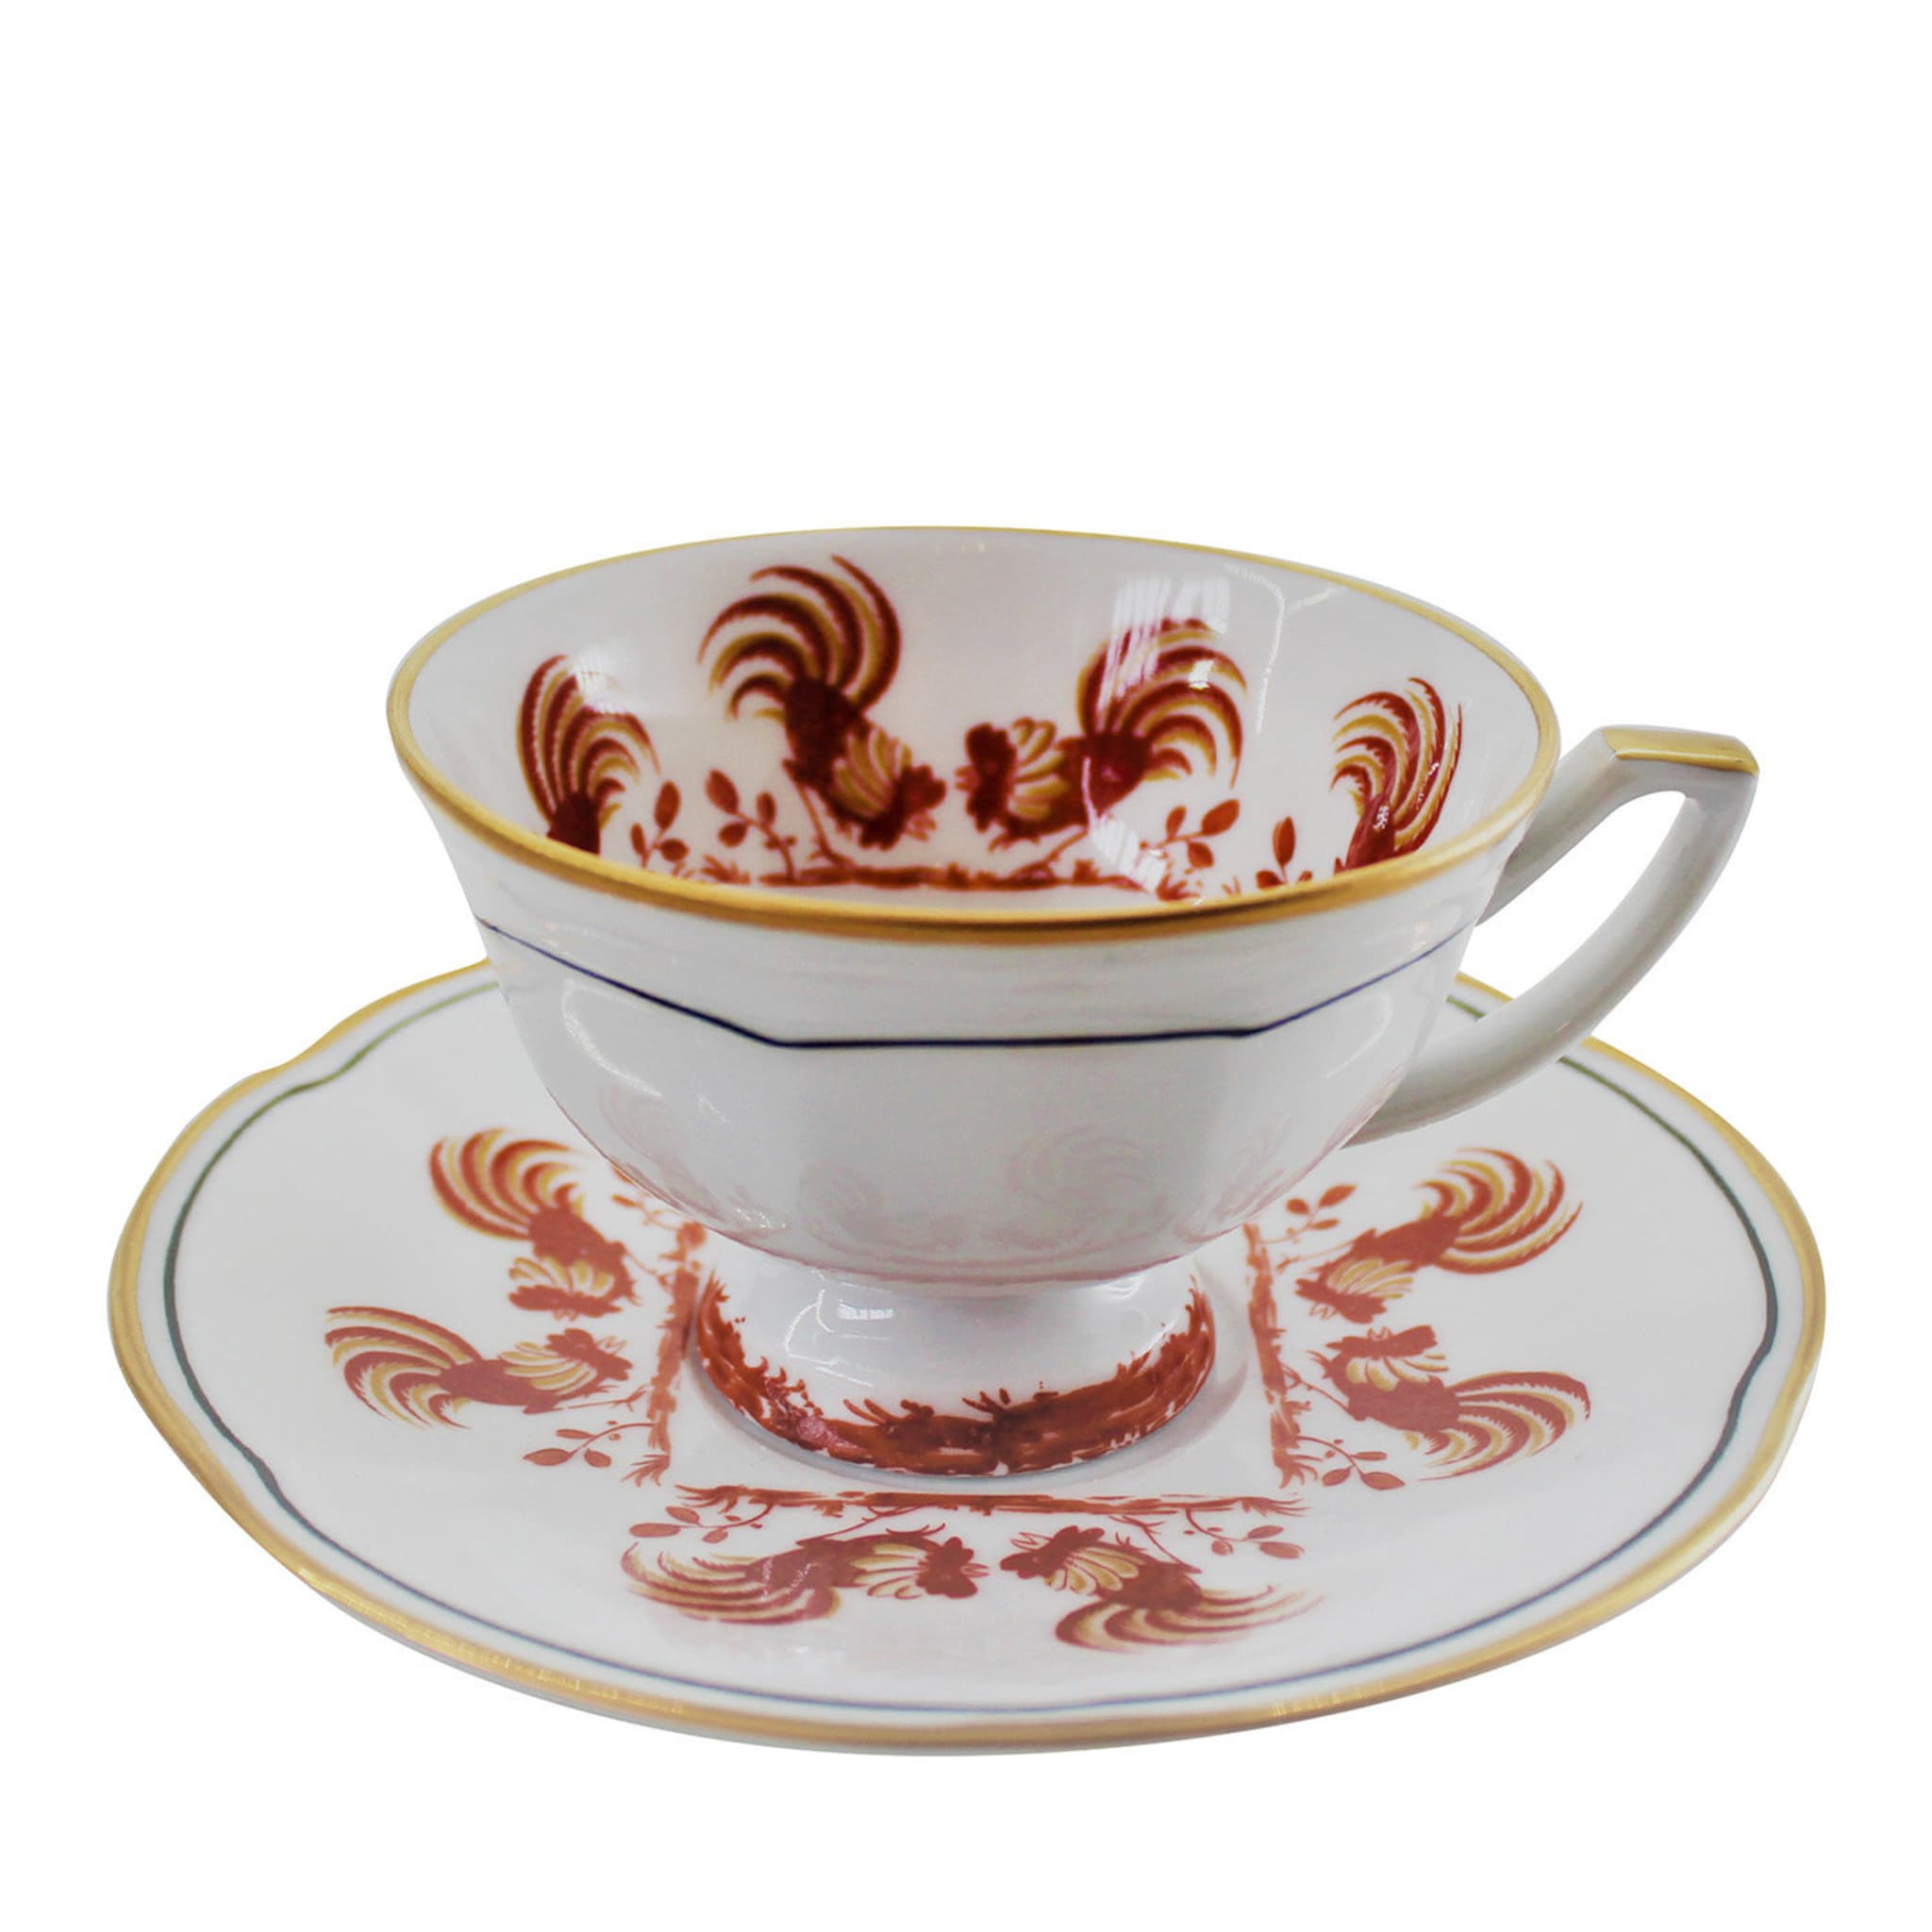 Tuscany Farm Set of 4 Tea Cups with Saucers - Main view